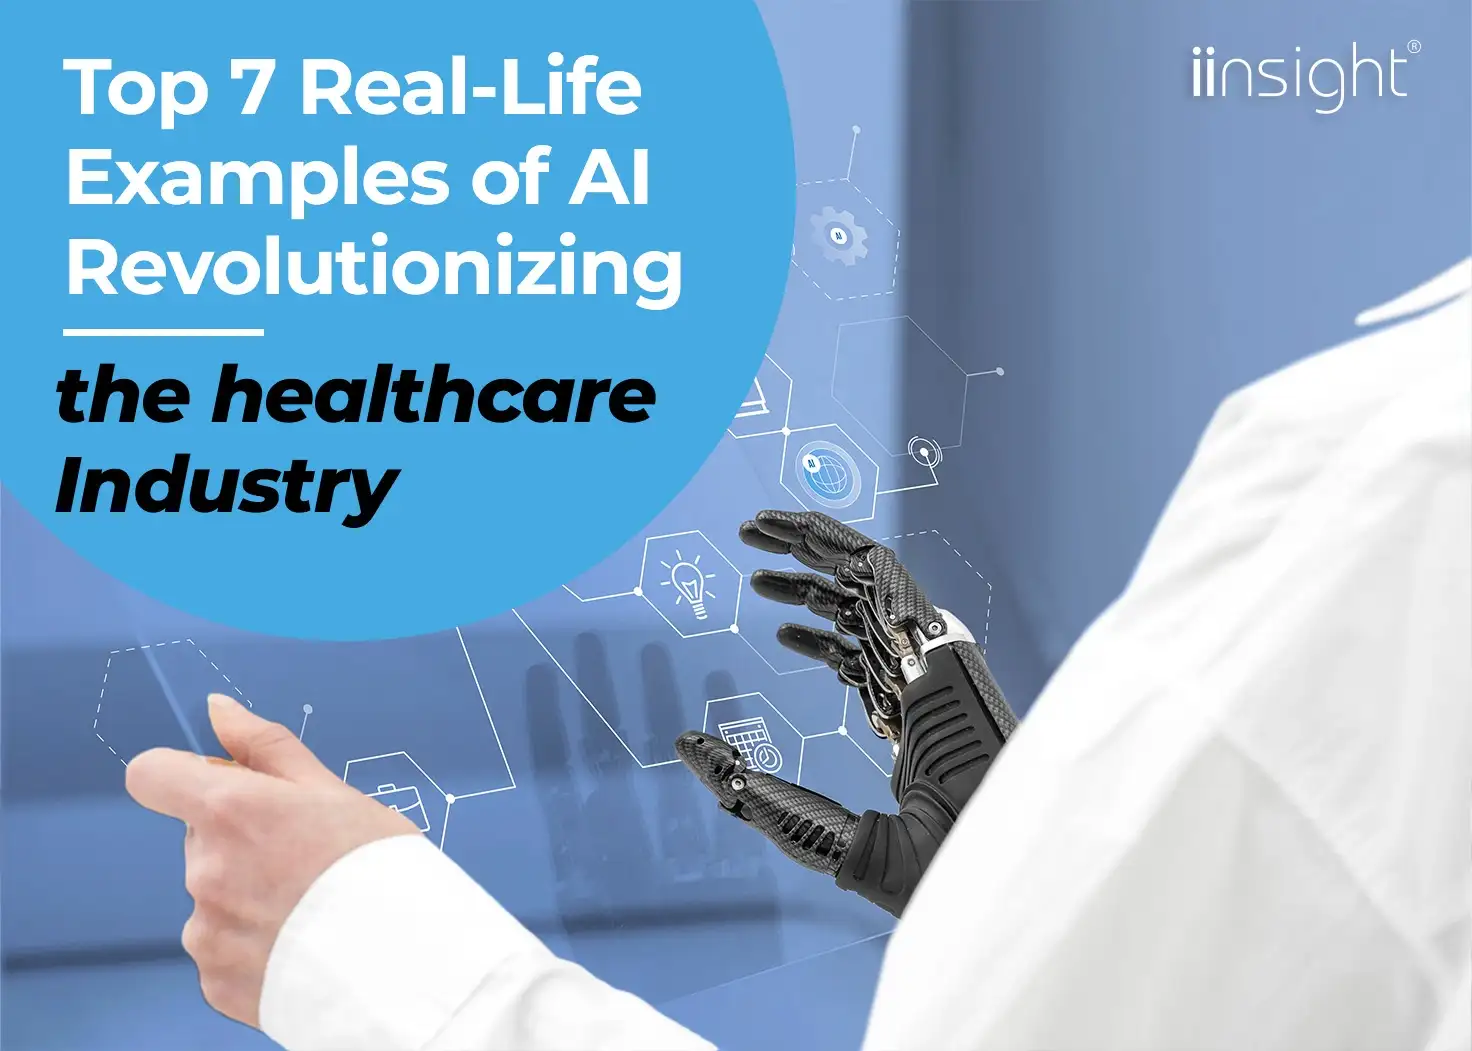 AI in Action: Top 7 Real-Life Examples of AI Revolutionizing the Healthcare Industry